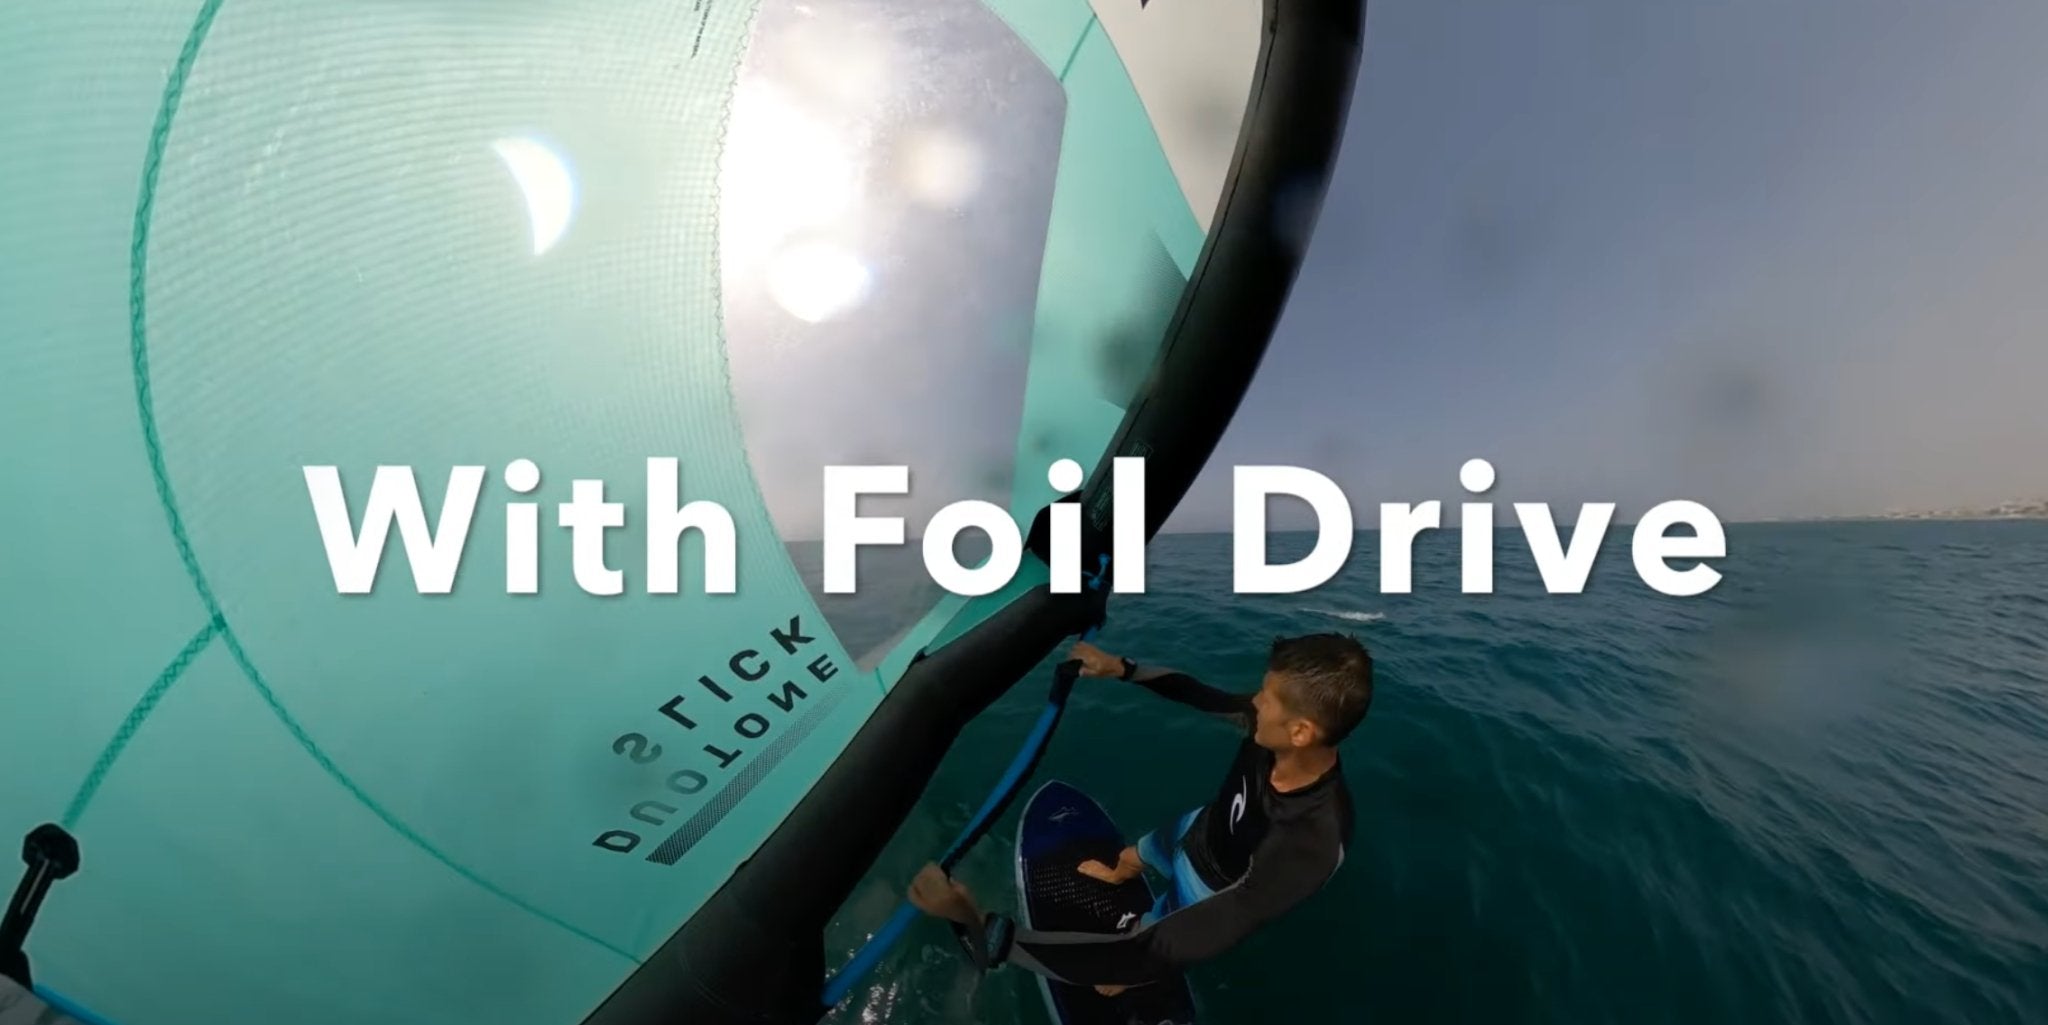 FoilDrive - WINGING WITH FOIL DRIVE ASSIST - Worthing Watersports